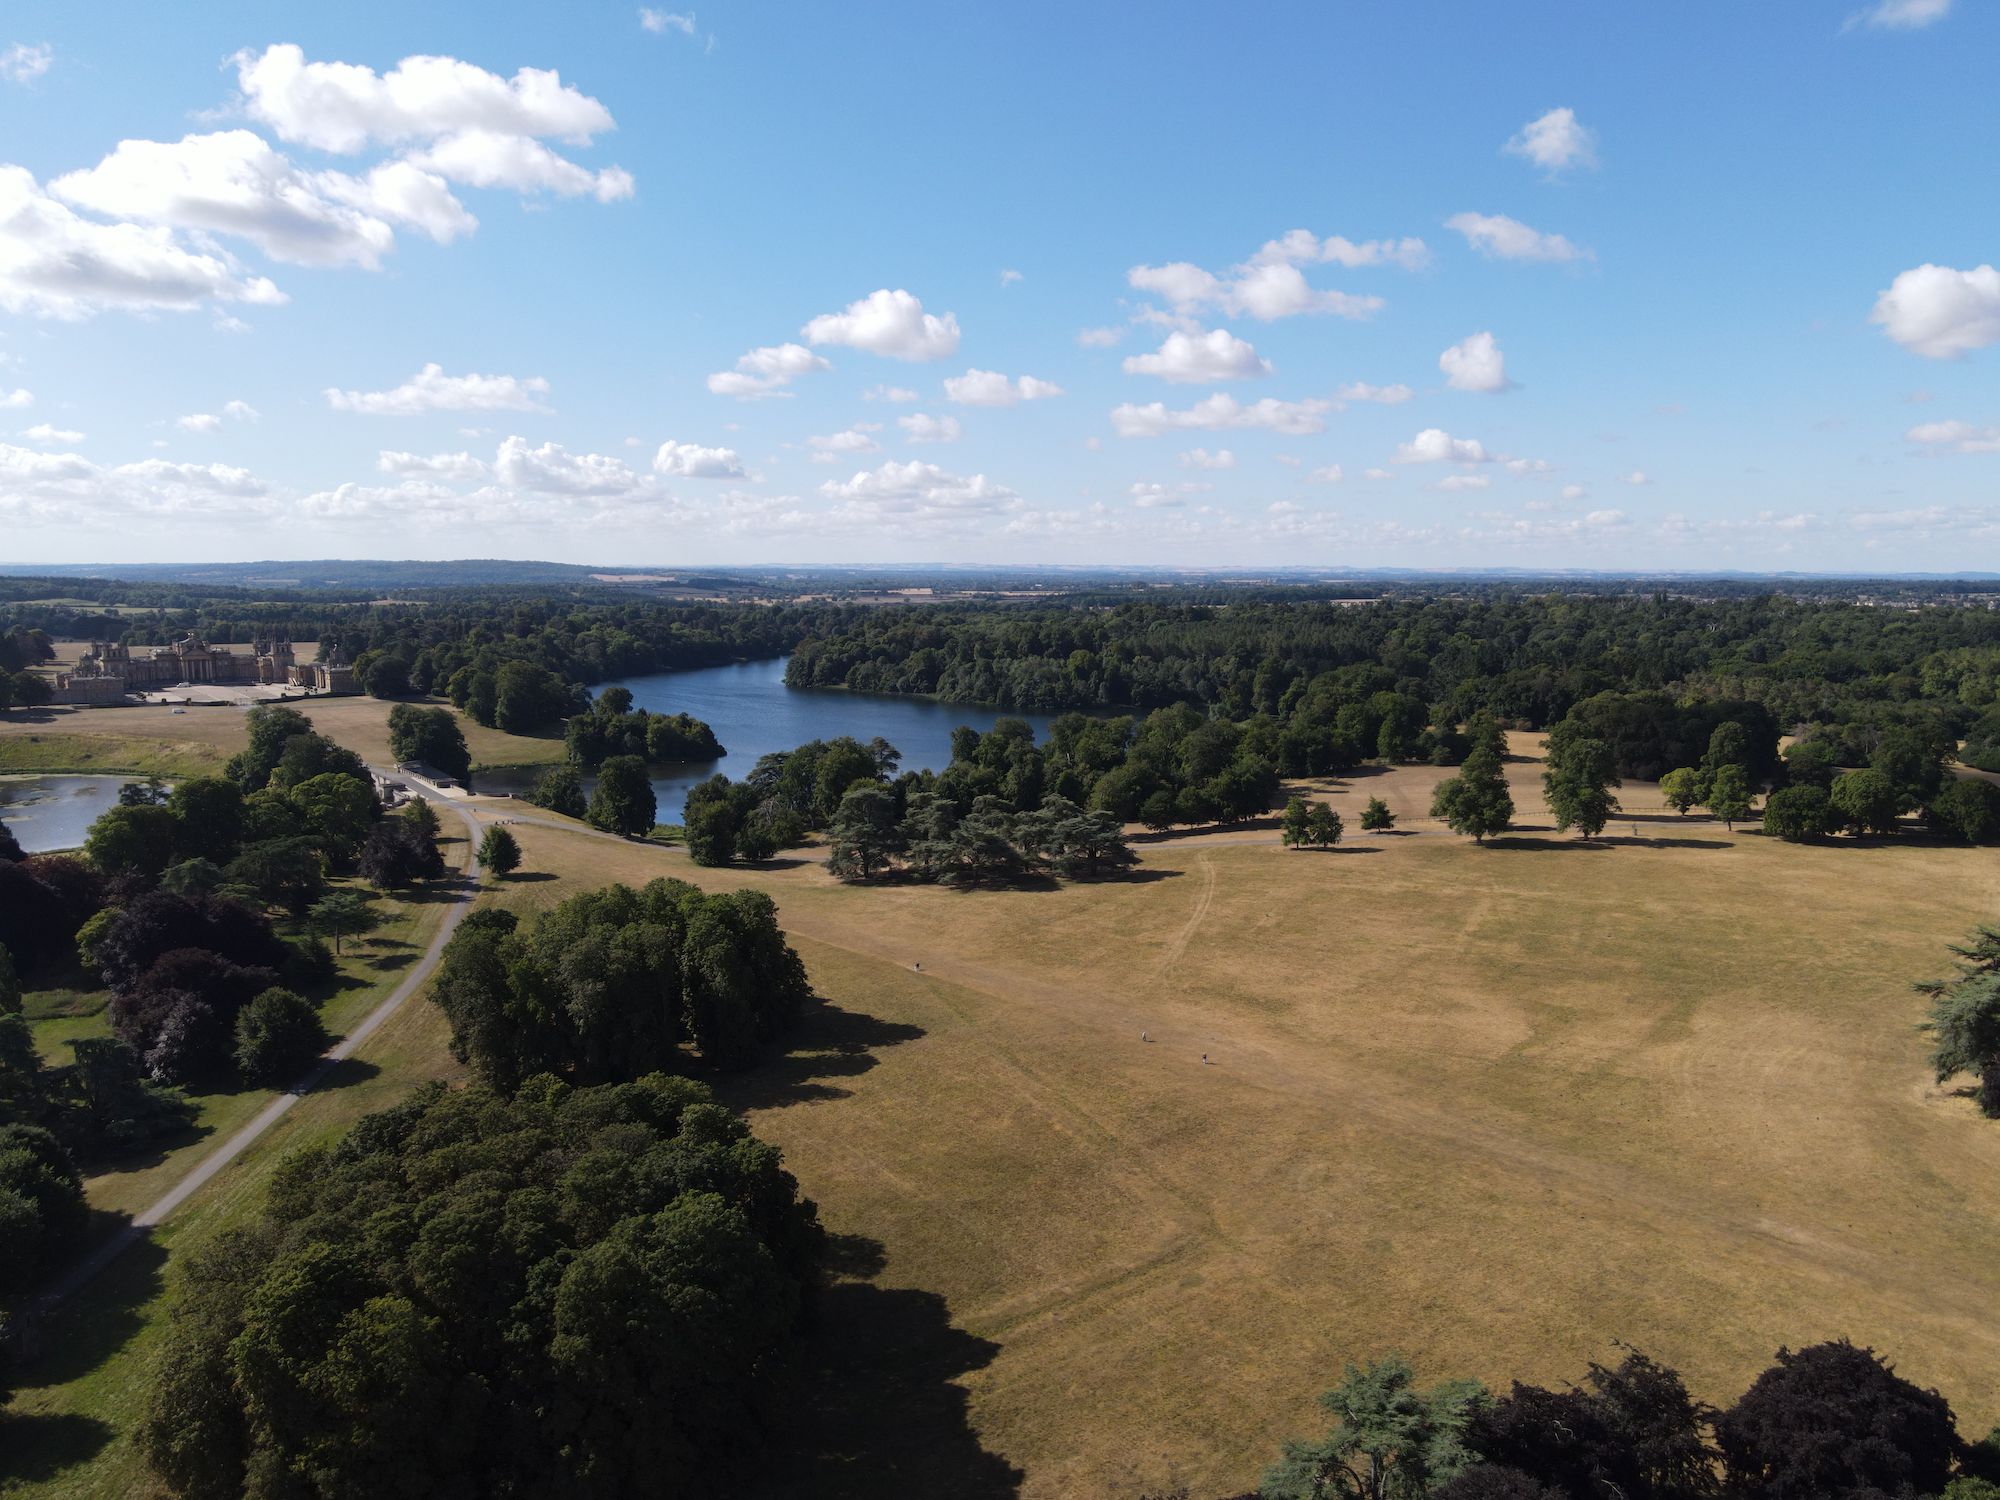 Wide ariel shot of Blenheim palace in Woodstock oxfordshire